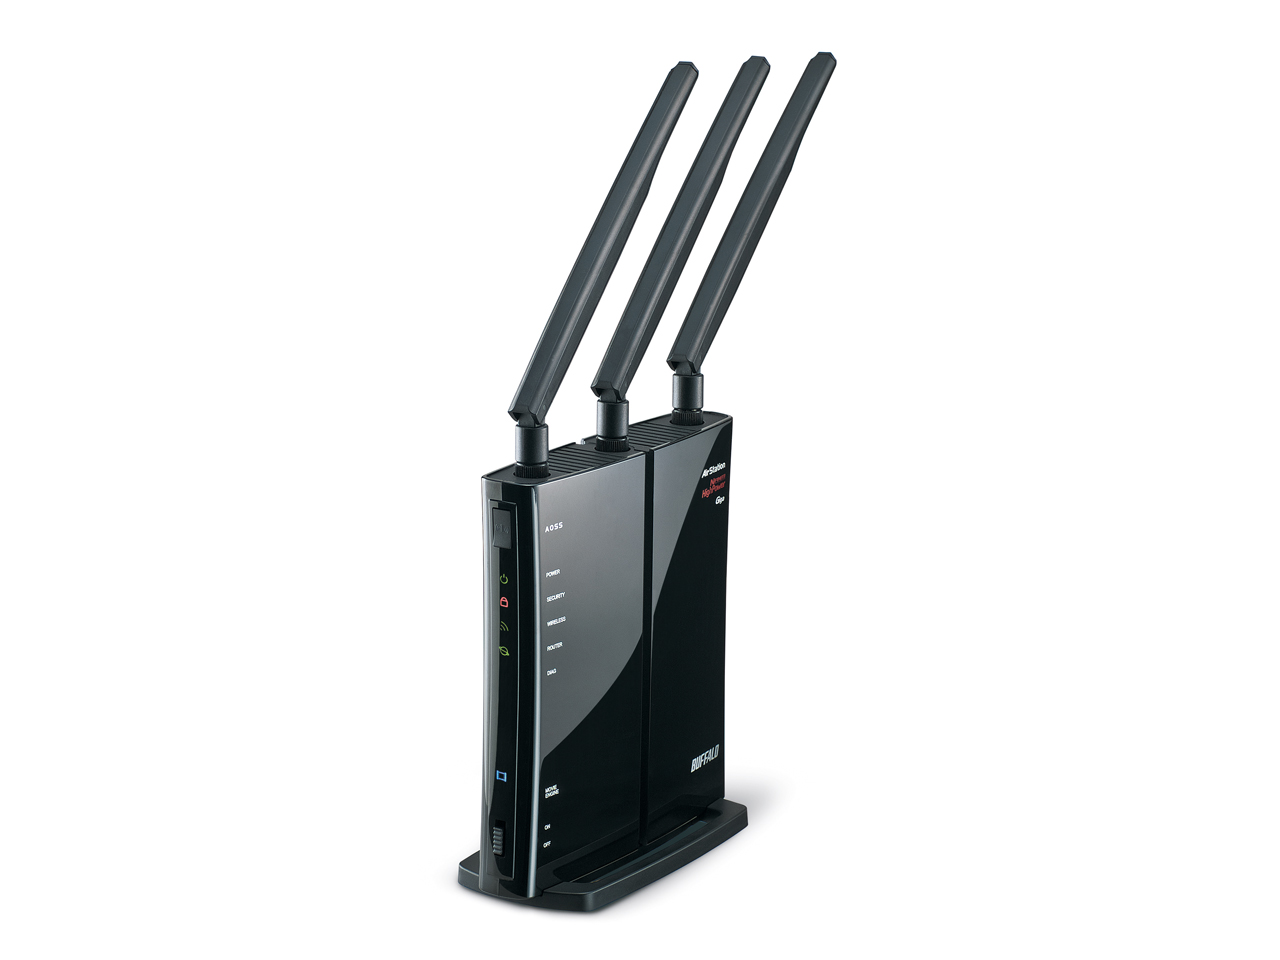 magasin Converge patron Wireless-N High Power Wireless Broadband Router forhome -  wireless_networking - 450mbps | BUFFALO GLOBAL